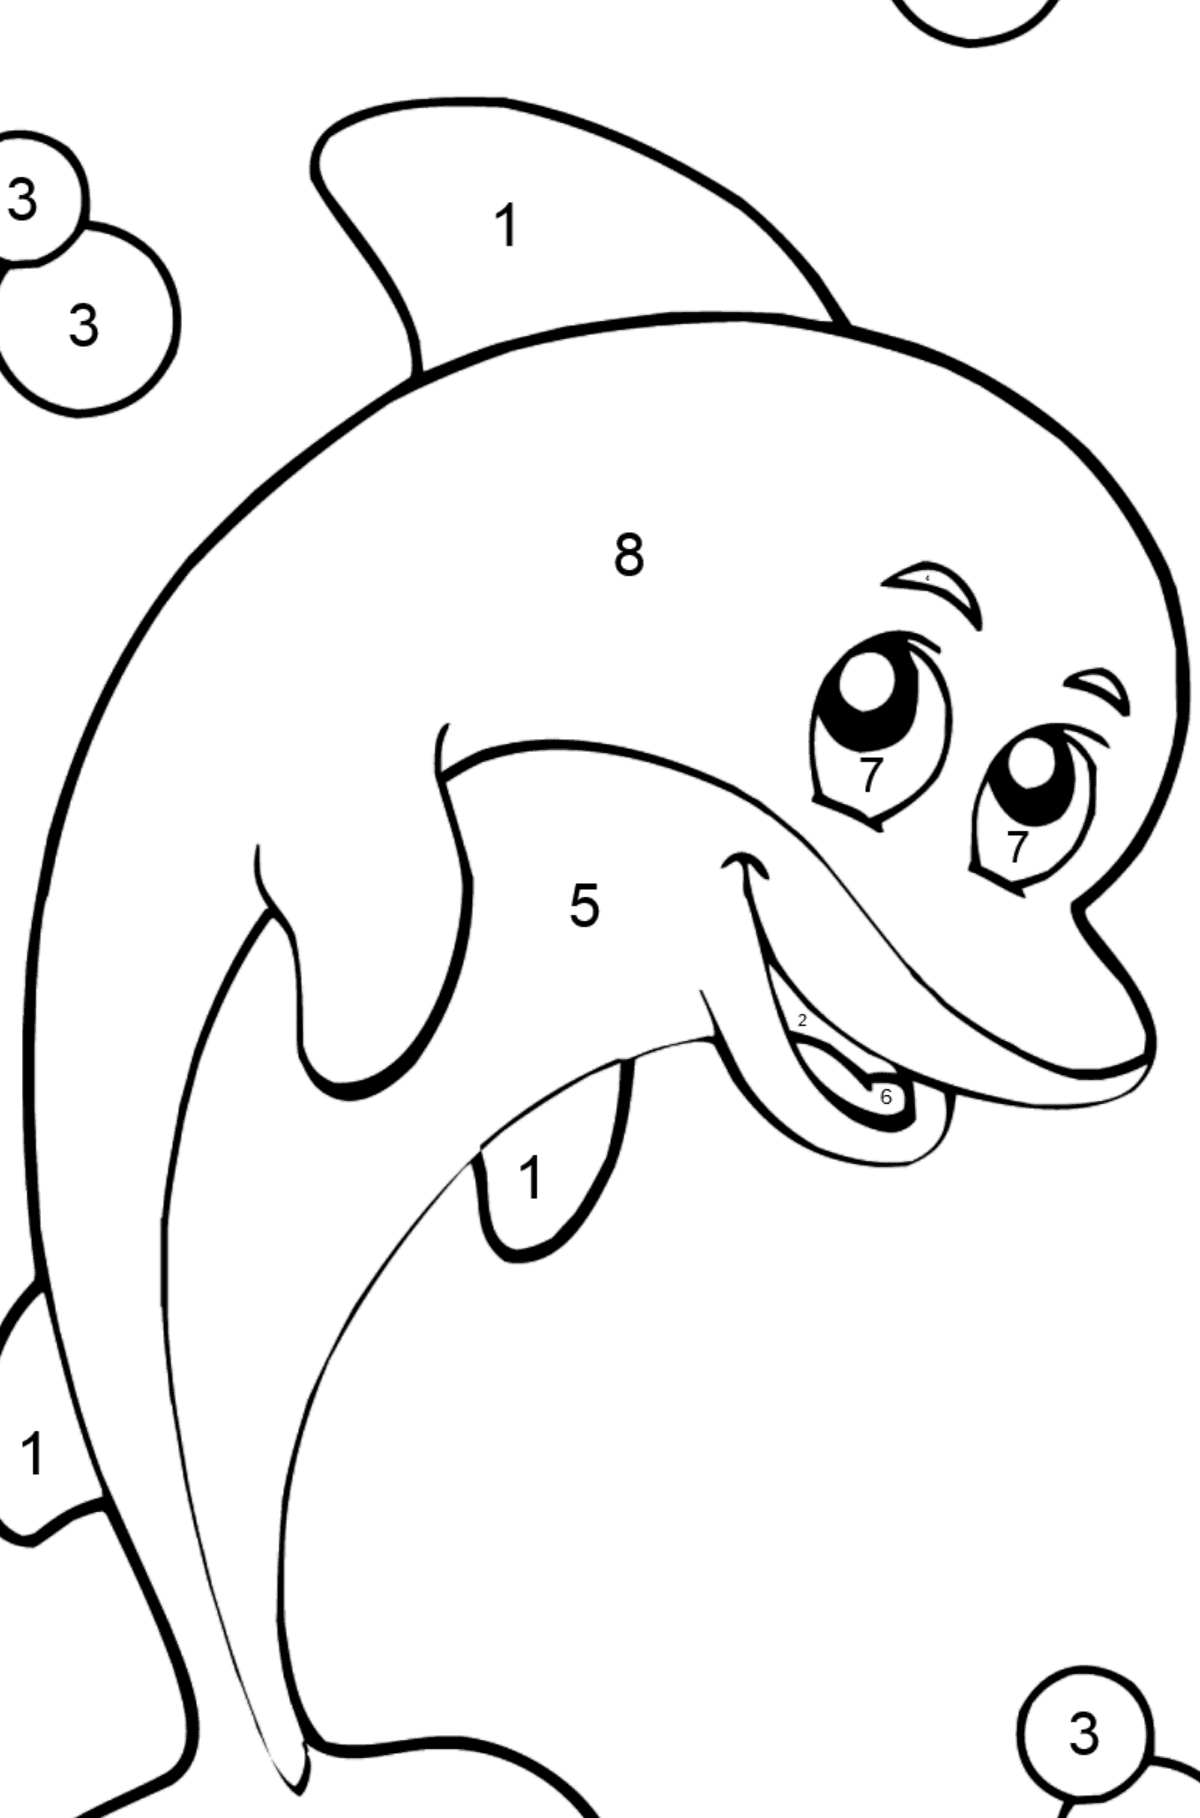 Coloring page with a Cartoon dolphin - Coloring by Numbers for Kids